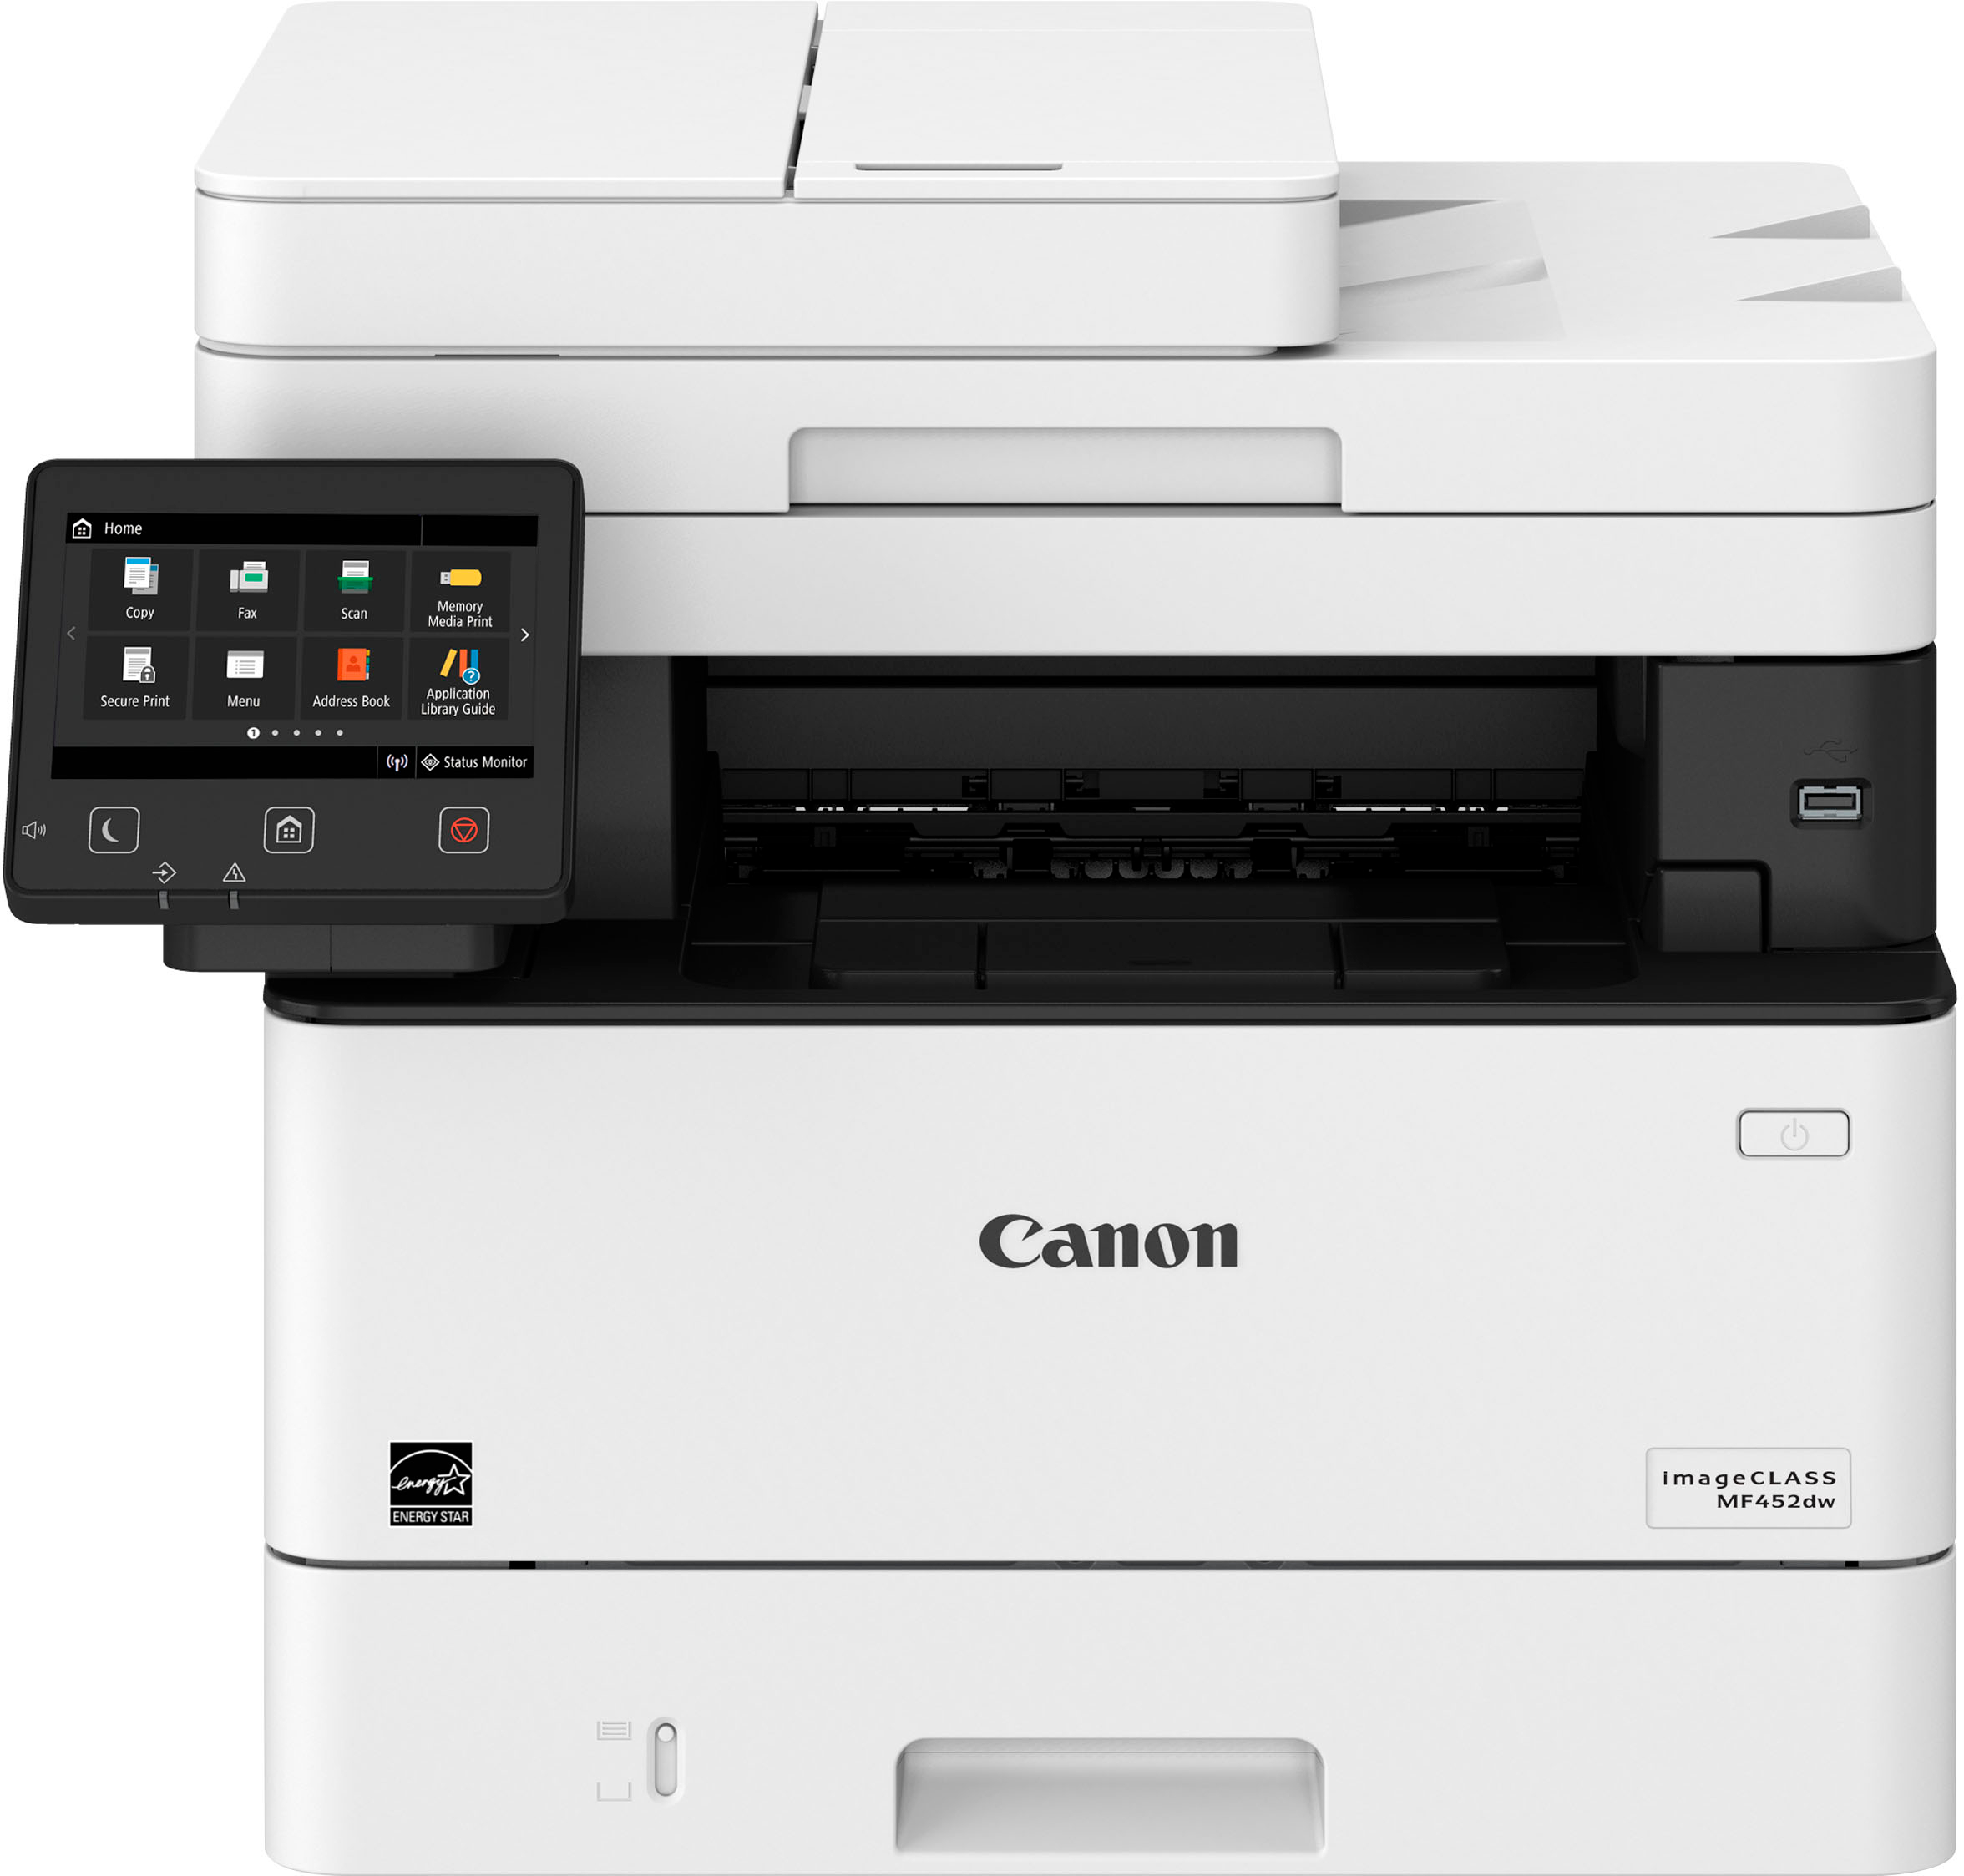 Best Buy: Canon imageCLASS MF452dw Wireless Black-and-White Laser with Fax White 5161C012